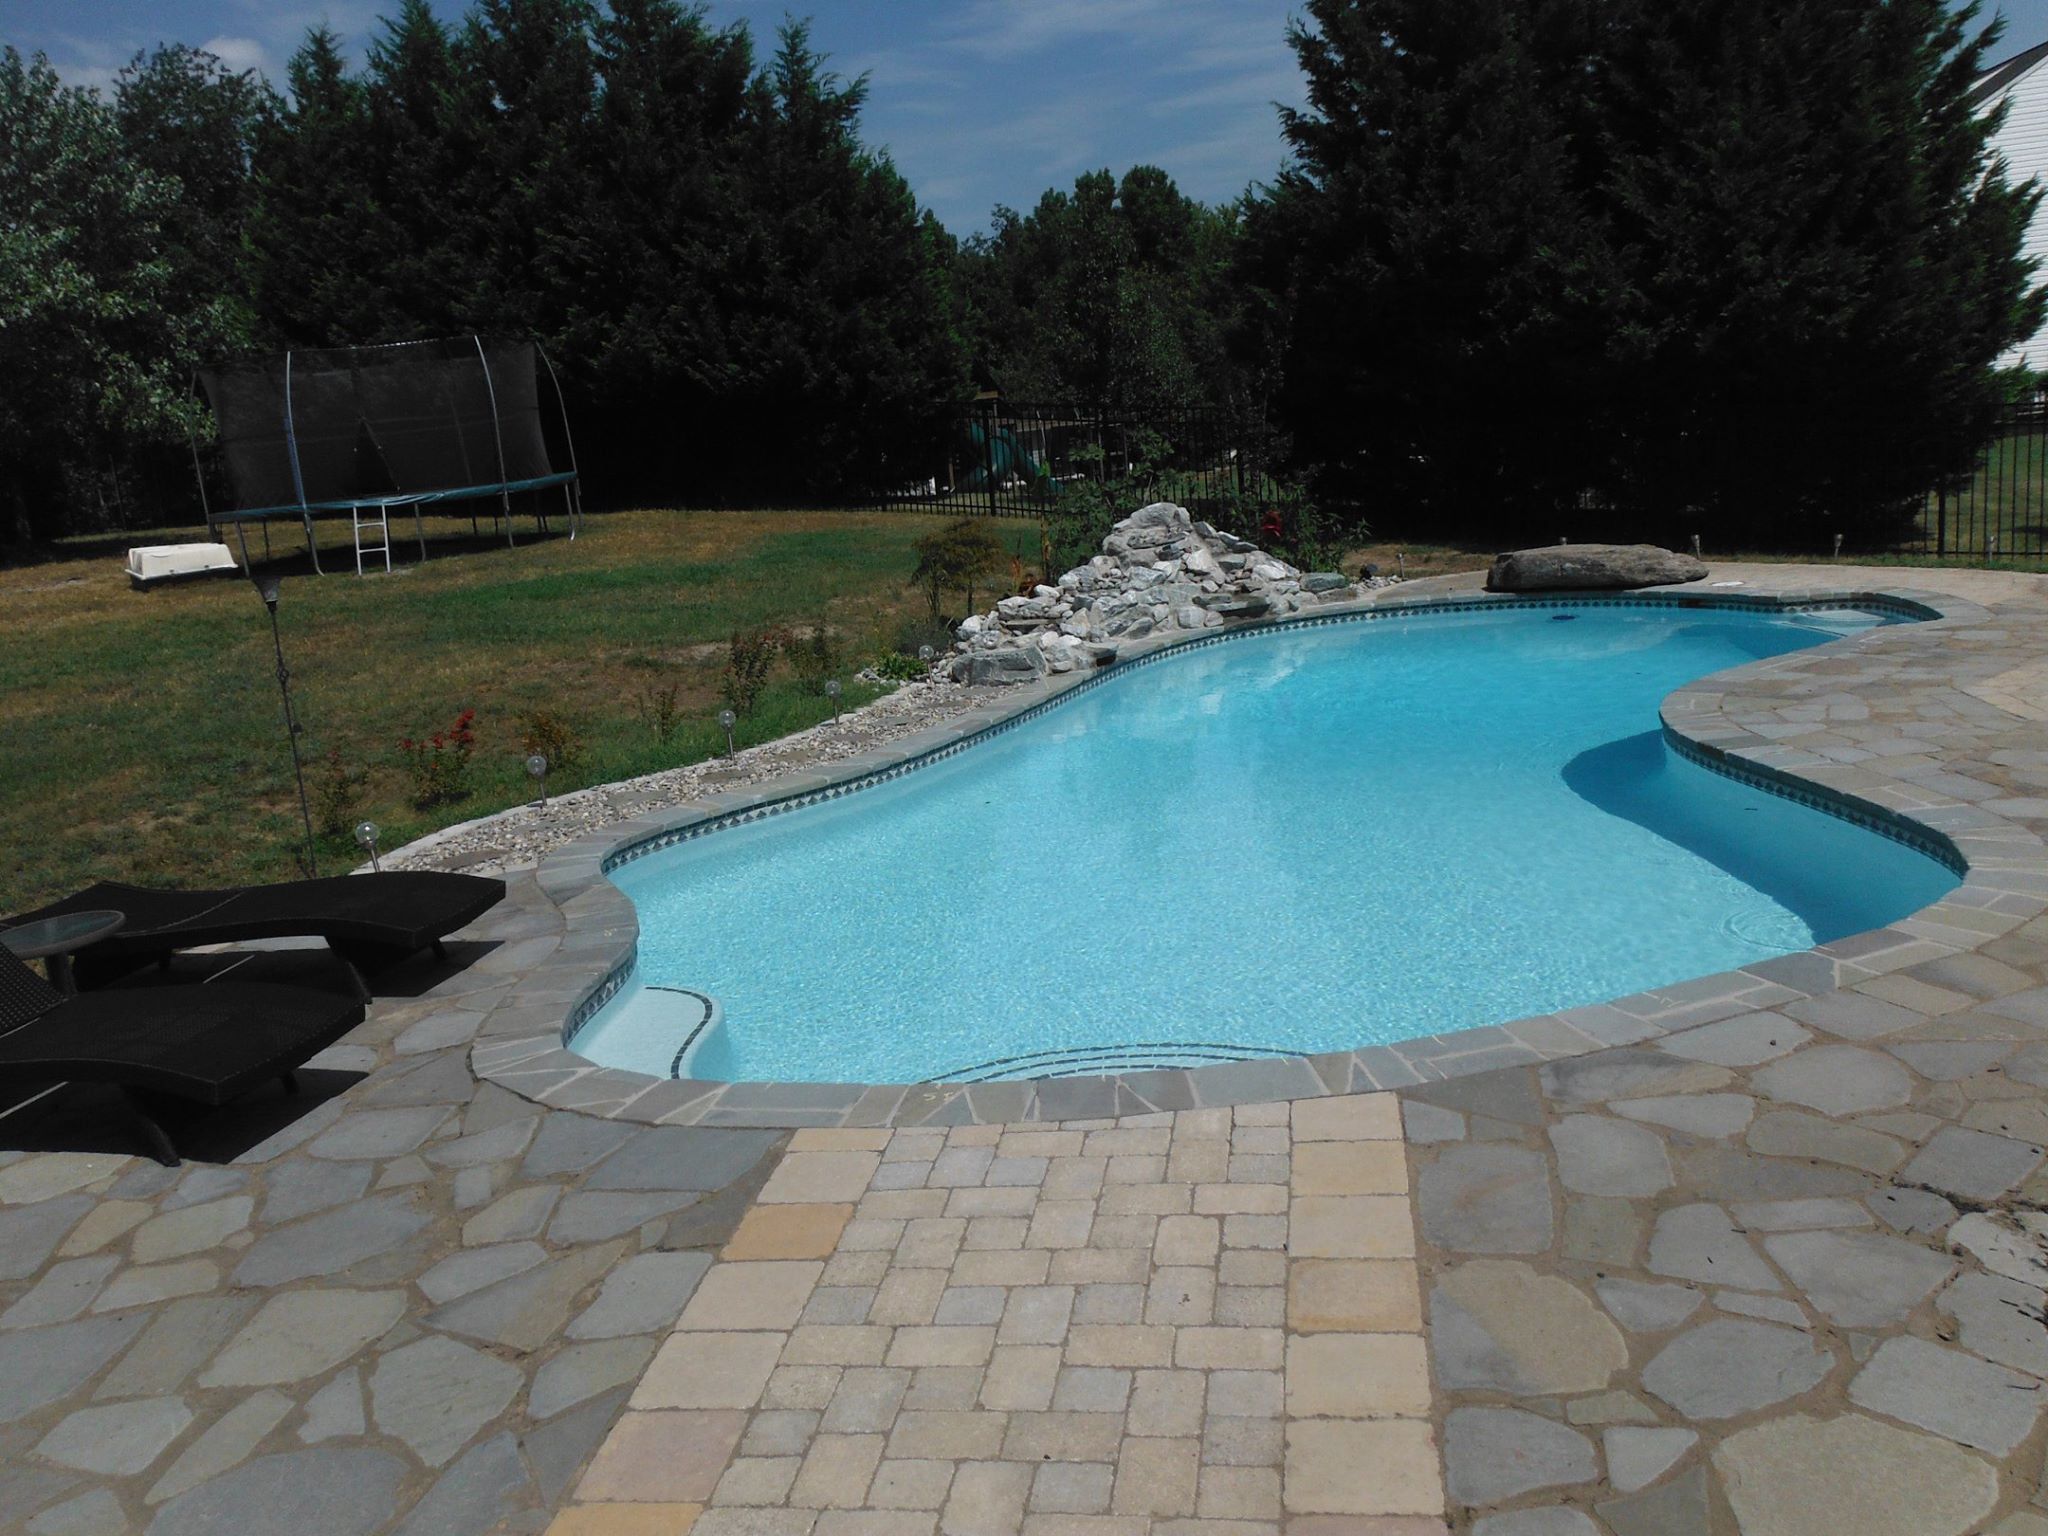 Investing in a pool, spa, paver driveway, deck or walkway adds value to your home and value to your life, so you deserve the best value and quality! Since 1989, Family Pool, Spa & Billiard Centers has delivered both to satisfied customers in the Jacksonville area. They want you to have the best possible experience, with affordable prices and the finest quality products! Contact Family Pool, Spa & Billiard Centers today for free designs and estimates! 9044946000 http://www.familypool.com/